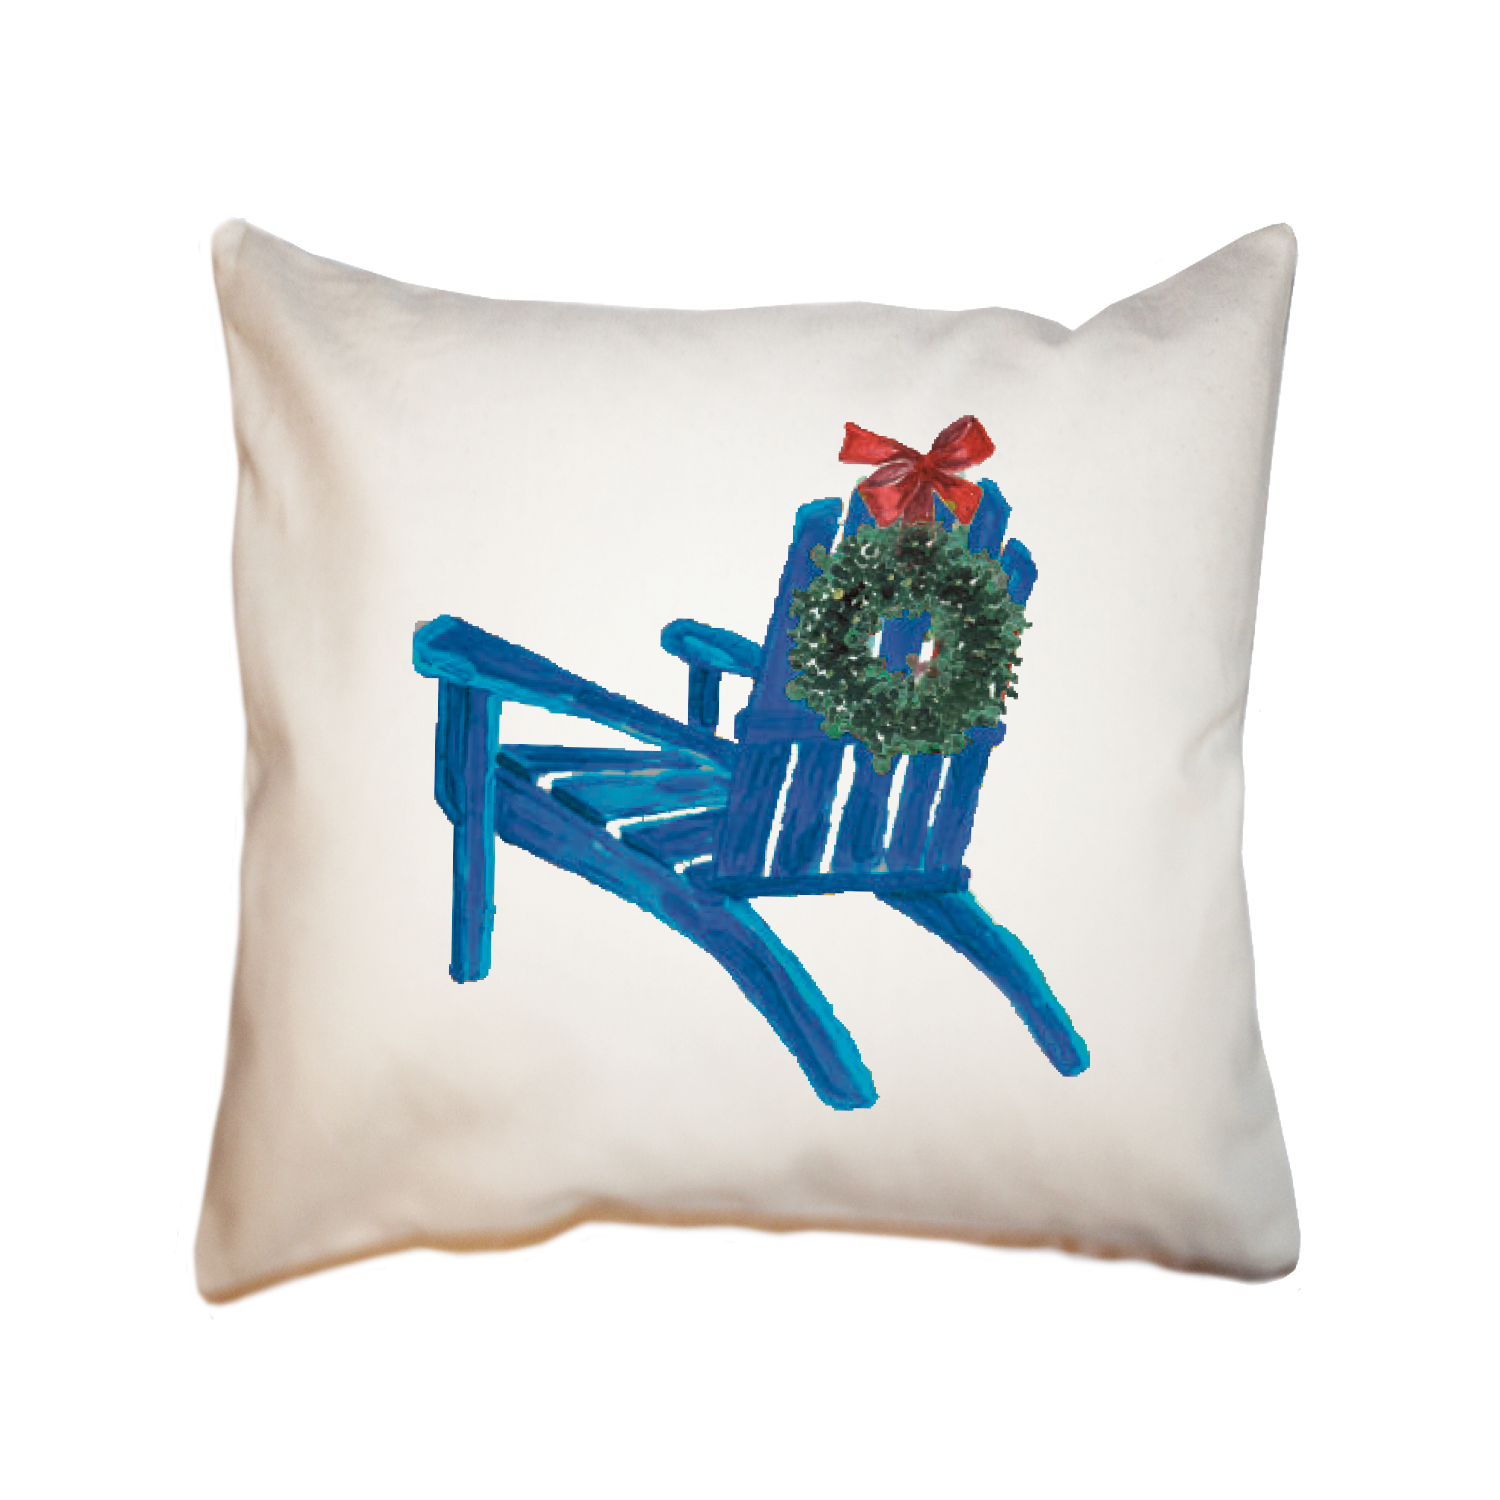 blue chair and wreath square pillow